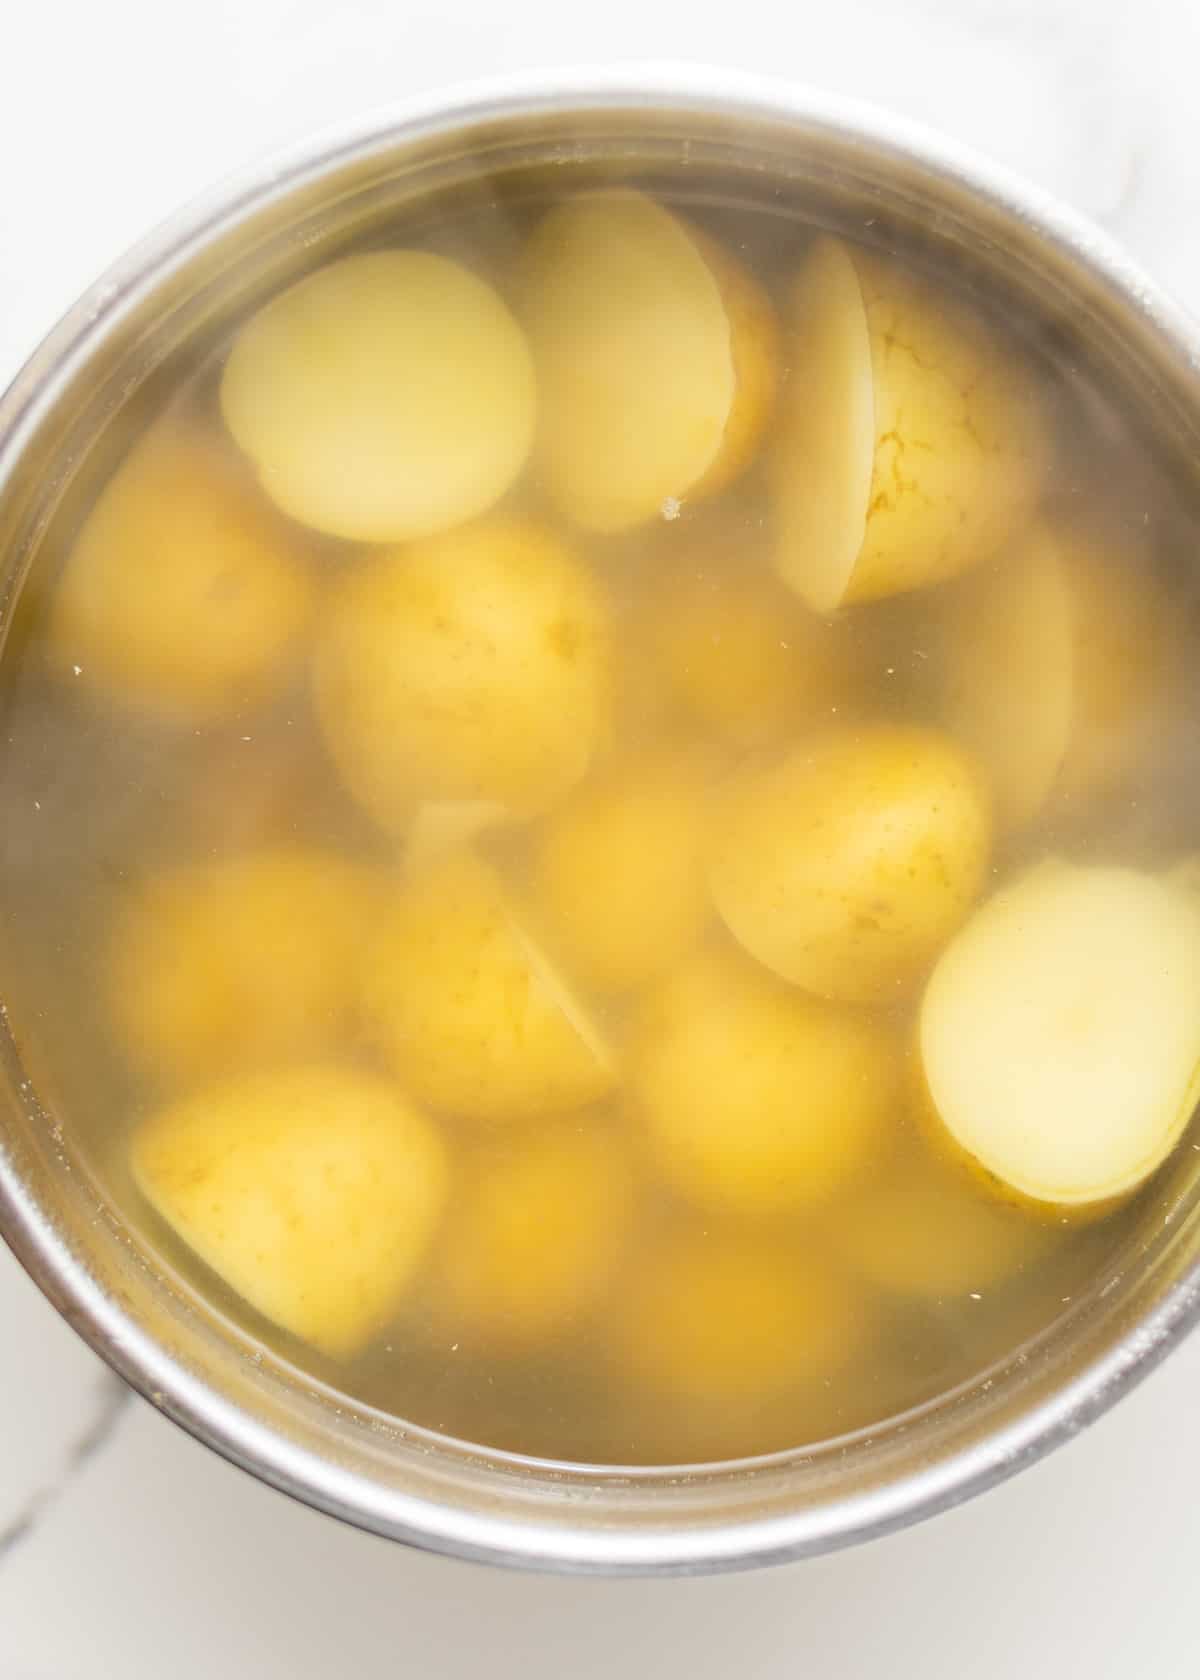 yukon gold potatoes cut in half and boiling in hot water.